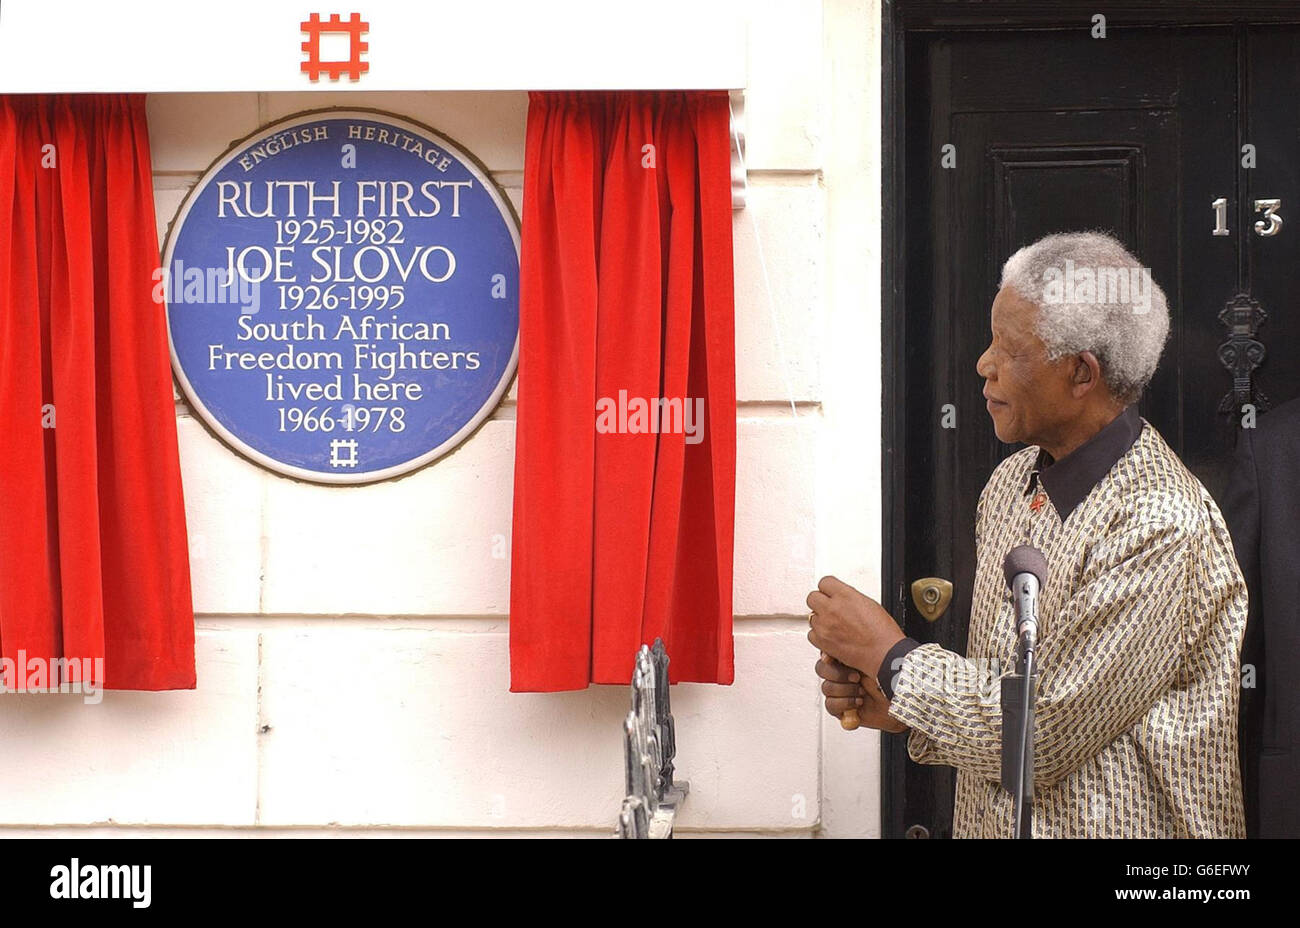 Nelson Mandela payed a personal tribute to two prominent anti-apartheid activists at their former home in Camden, north London by unveiling a plaque in their honour. * The former South African president unveiled the blue plaque at 13 Lime Street where Ruth First and her husband, Joe Slovo, lived between 1966 and 1978. Stock Photo